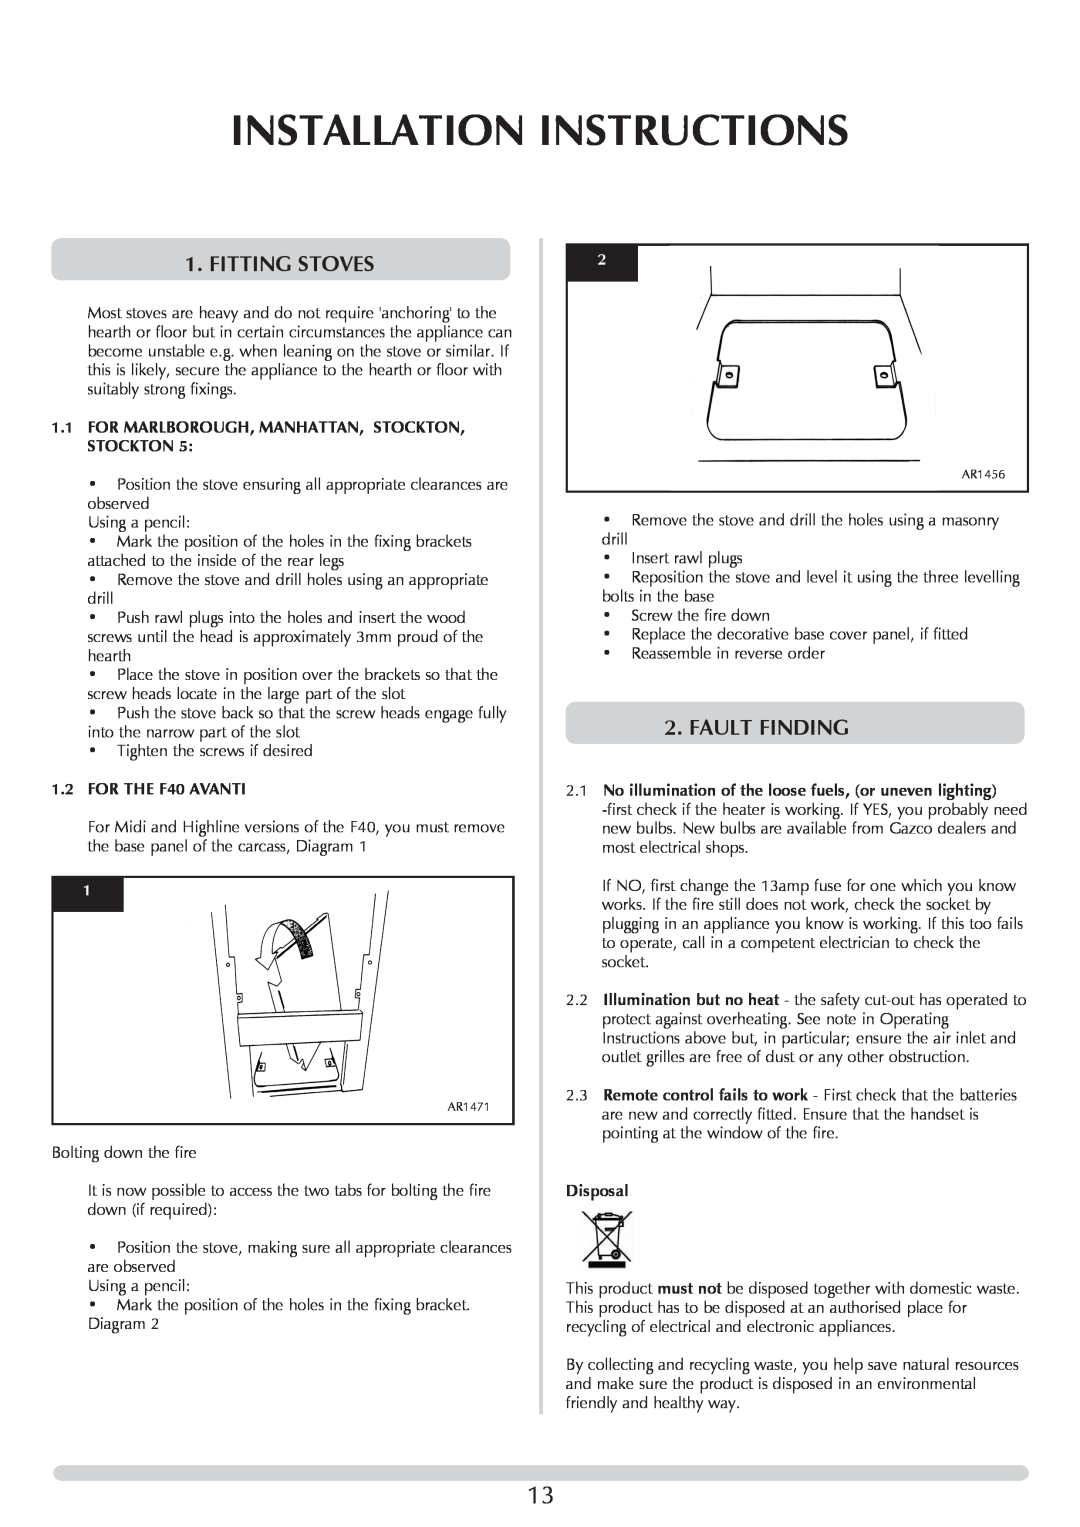 Stovax Electric Stove Range Installation Instructions, Fitting Stoves, Fault Finding, 1.2FOR THE F40 AVANTI, Disposal 